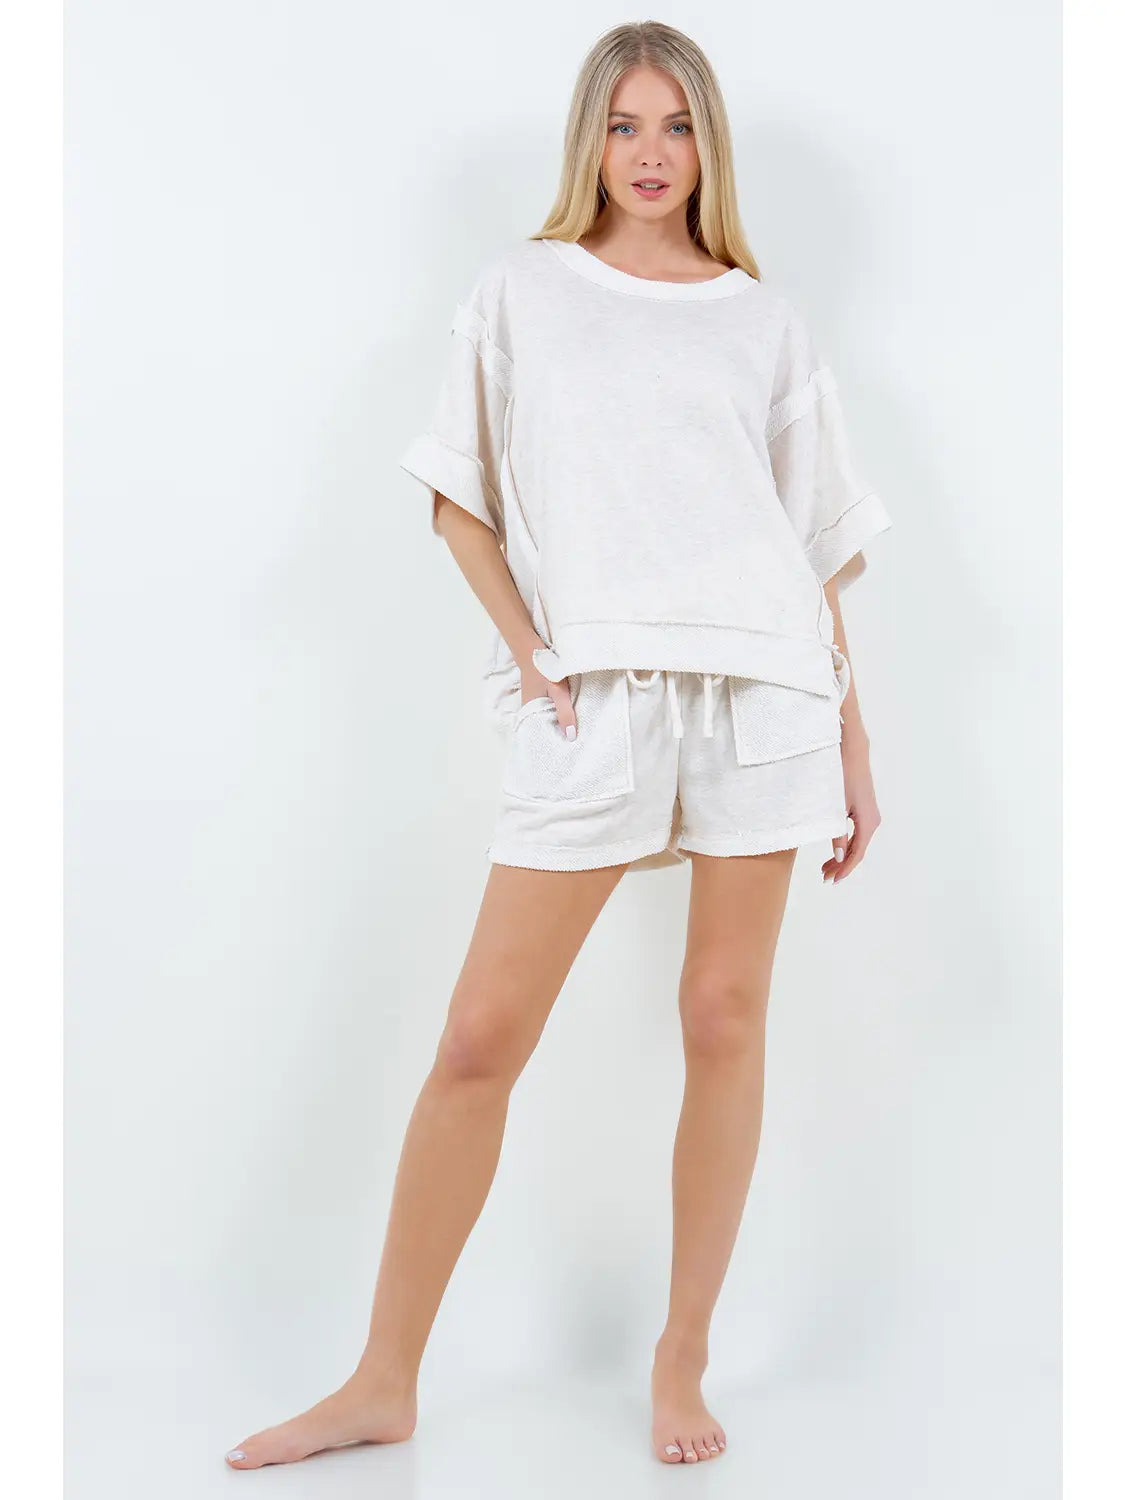 Oatmeal Contrast Terrycloth Top